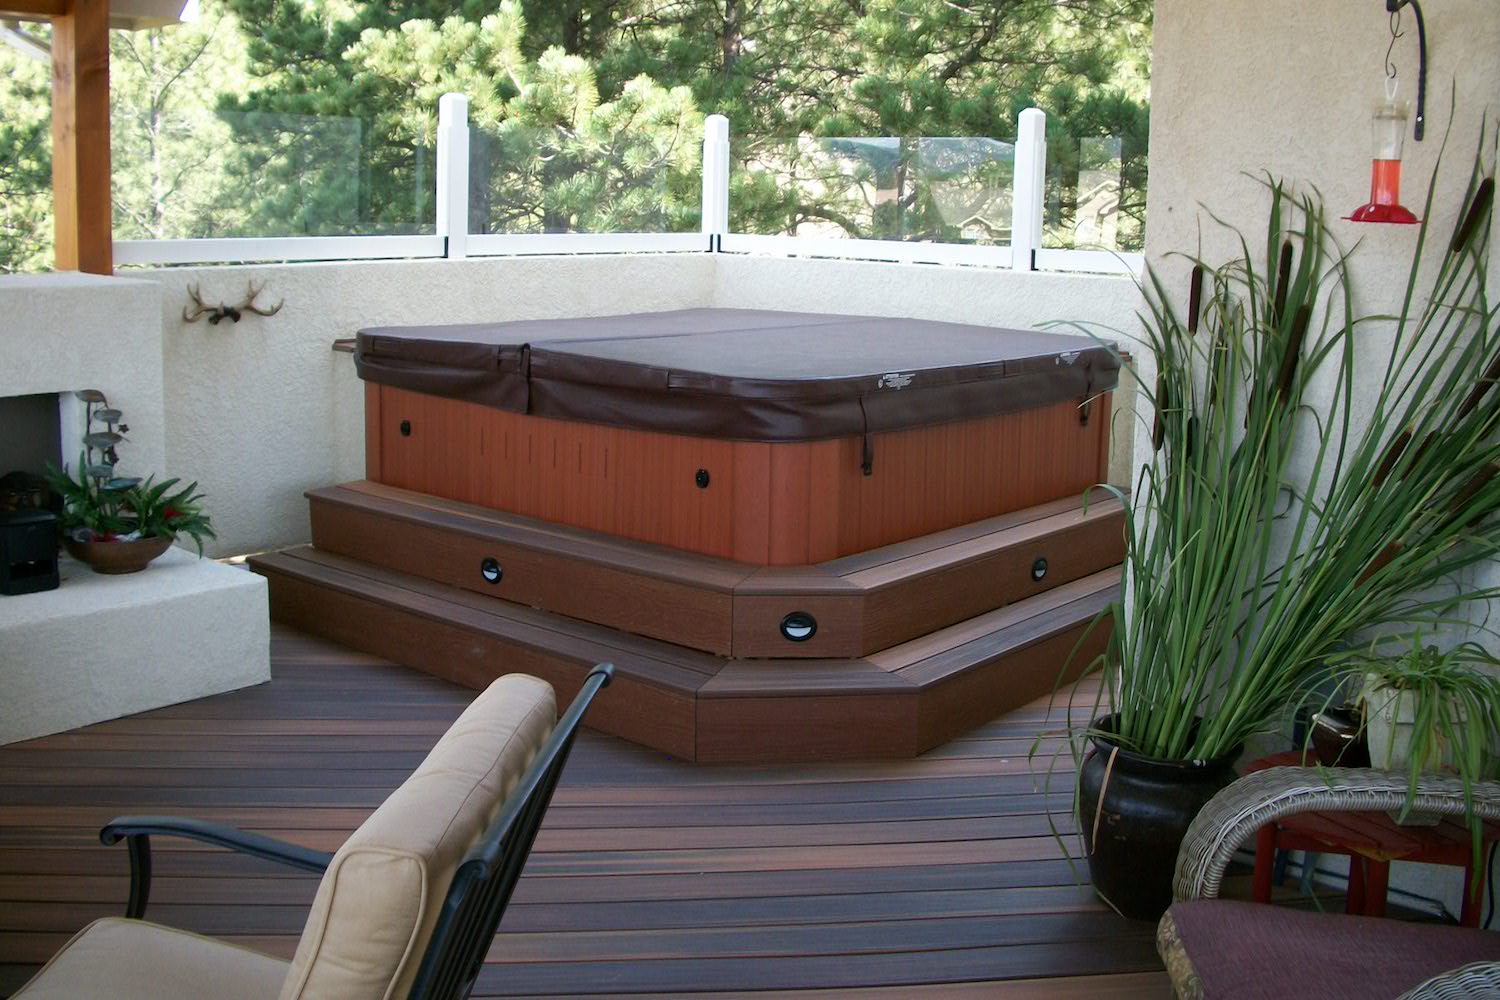 Composite deck with a hot tub, stucco half-walls, and steps built to the hot tub.